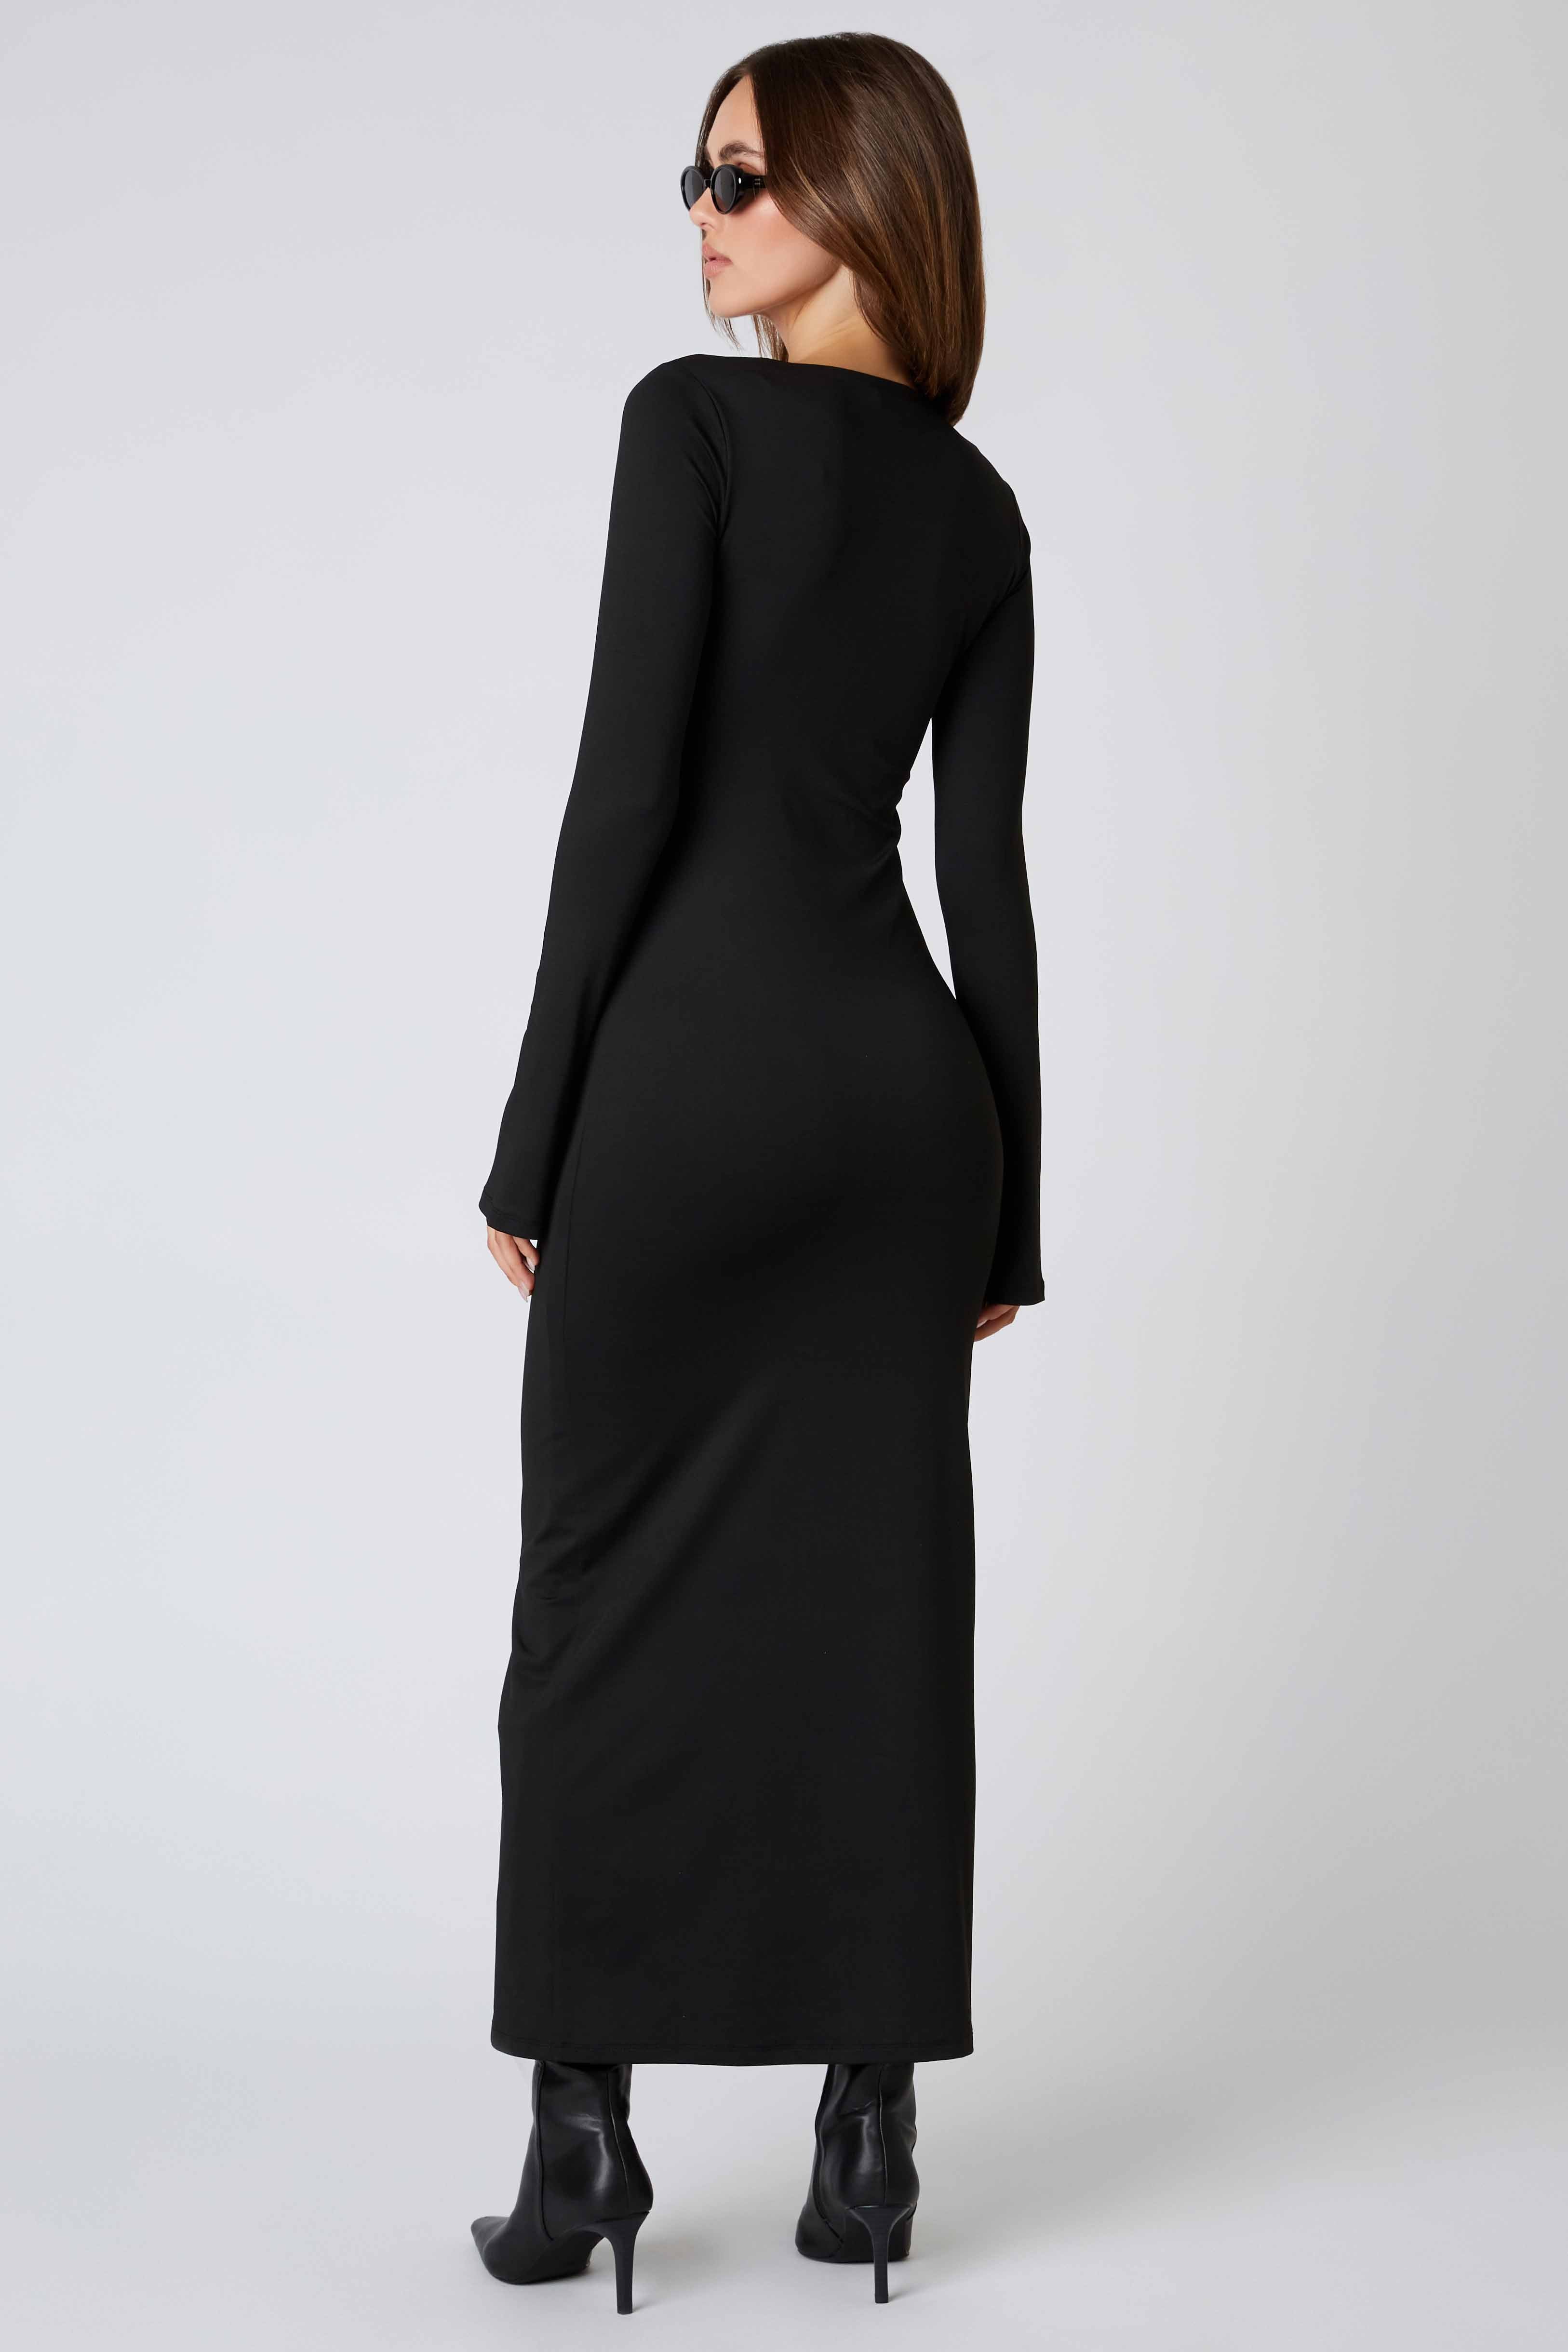 Long Sleeve Maxi Dress in Black Back View